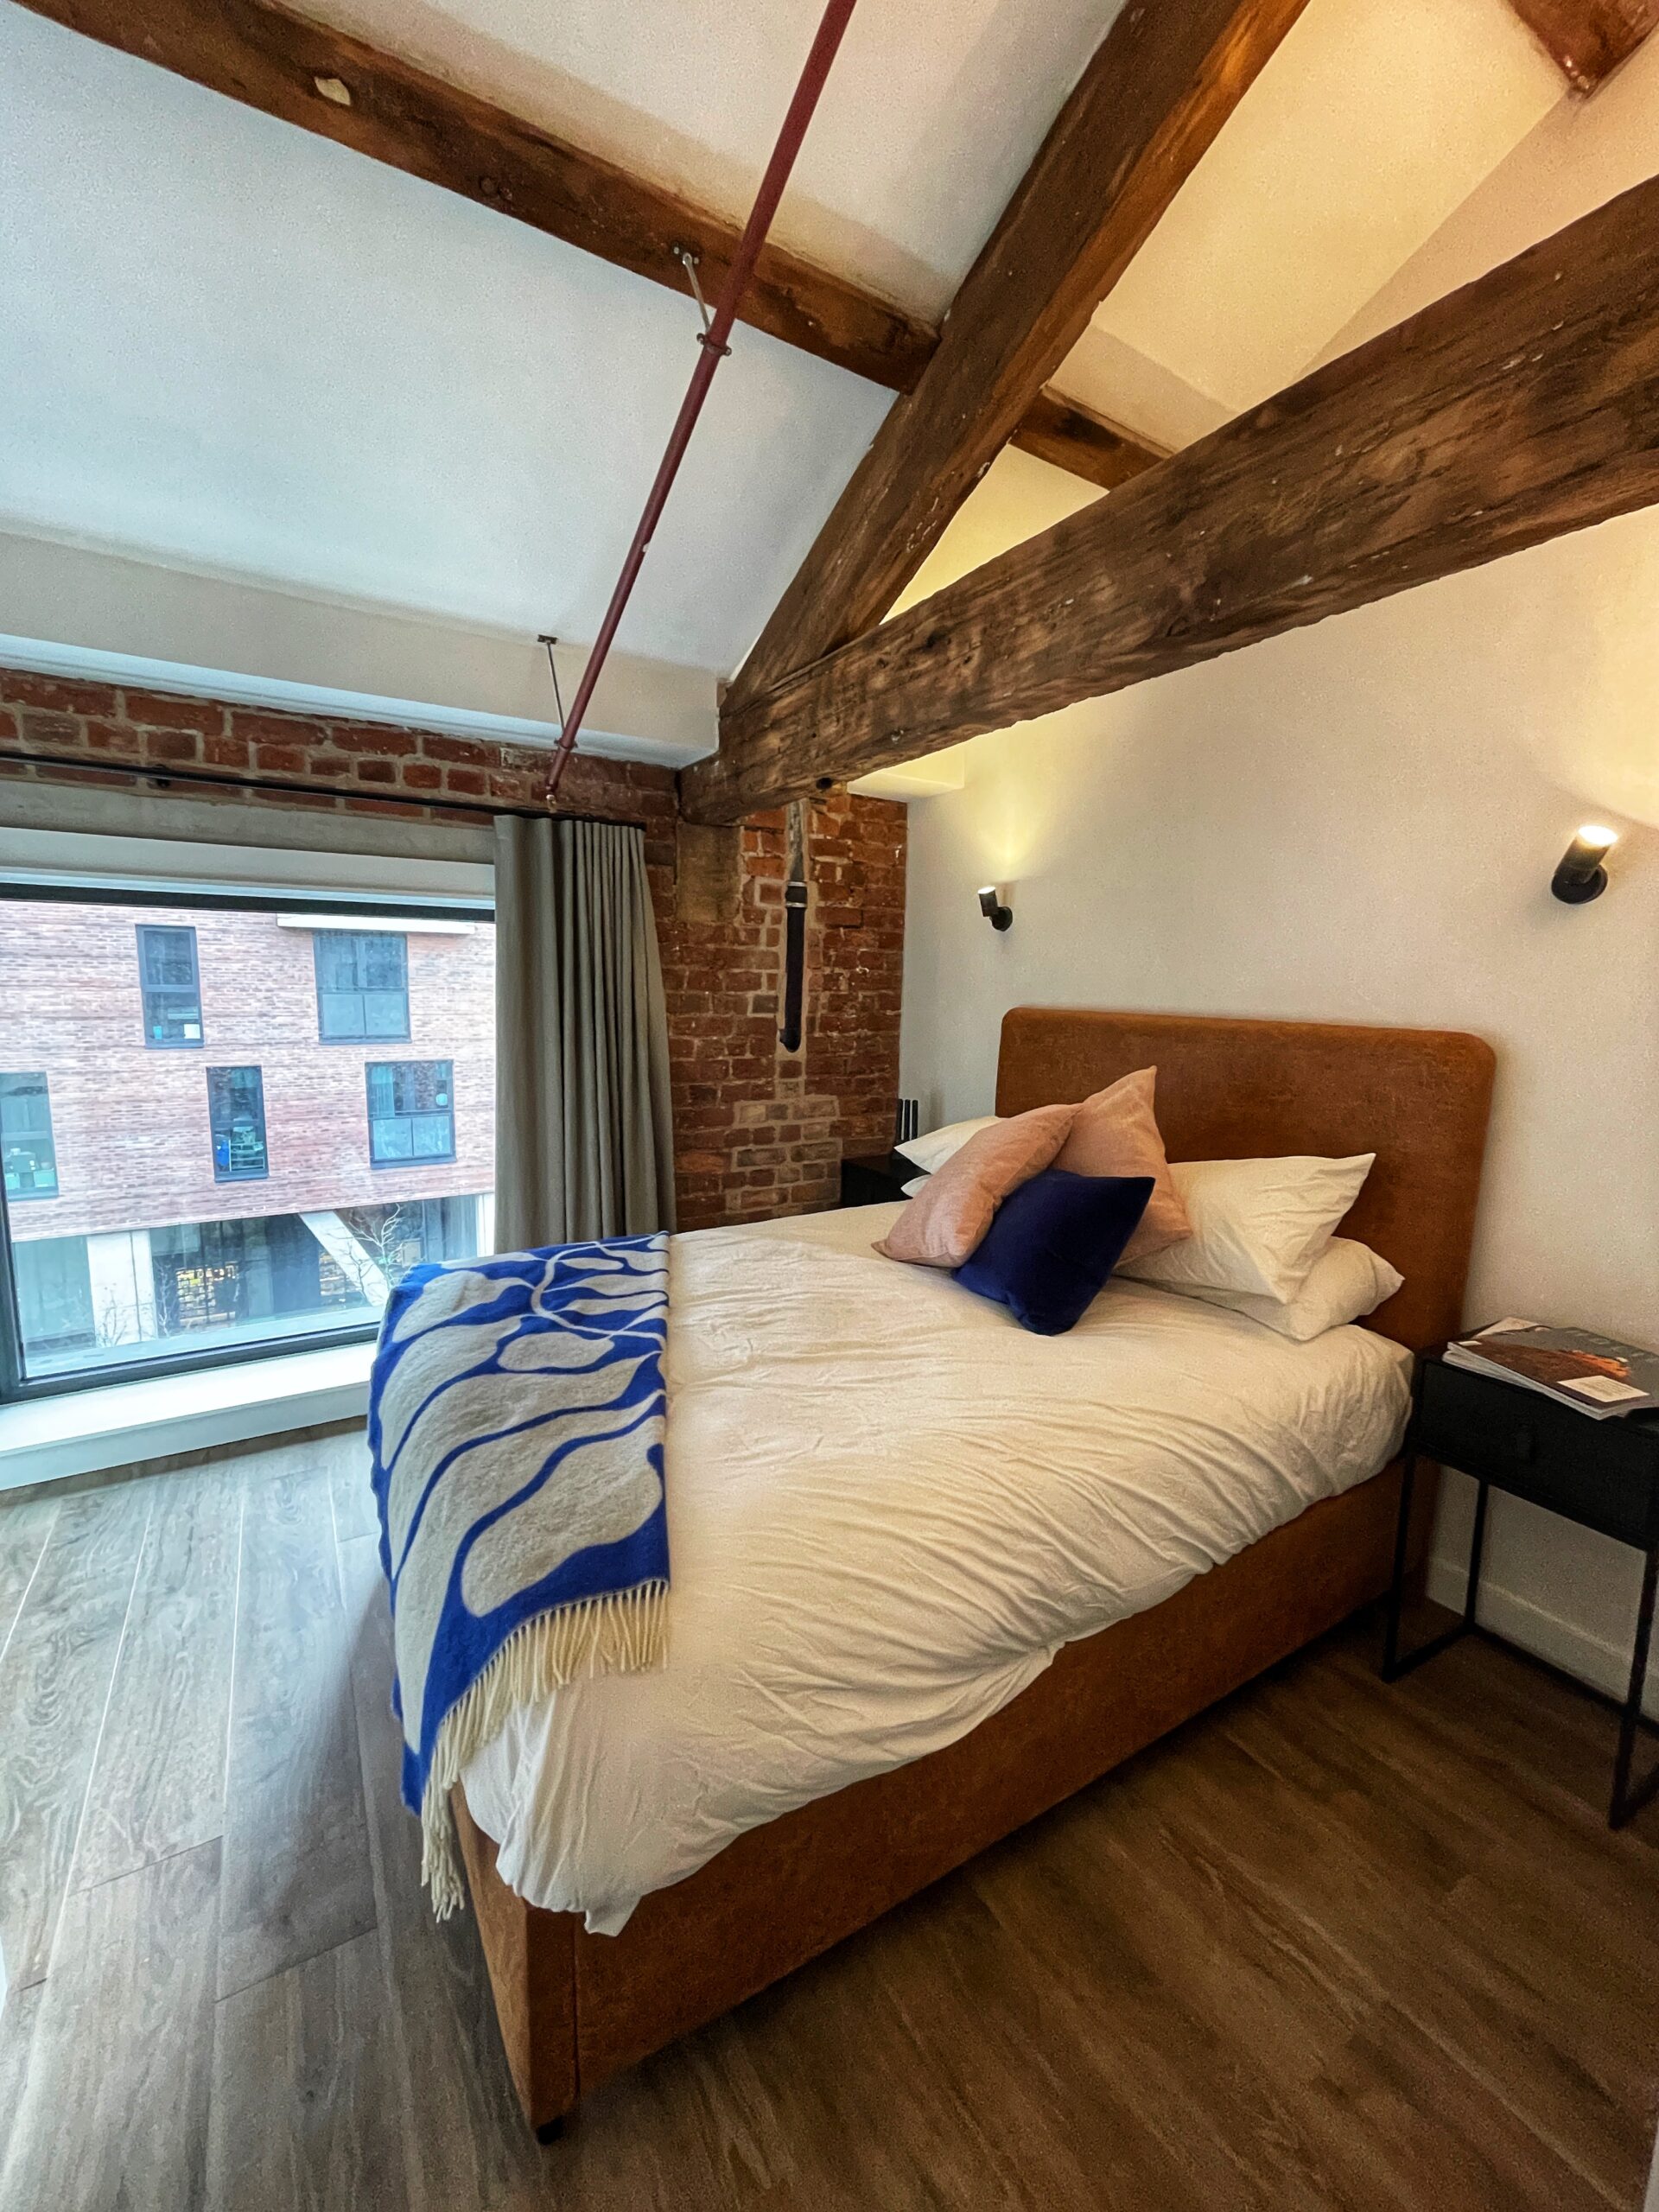 The master bedroom in the Minshull Street apartment at Kampus